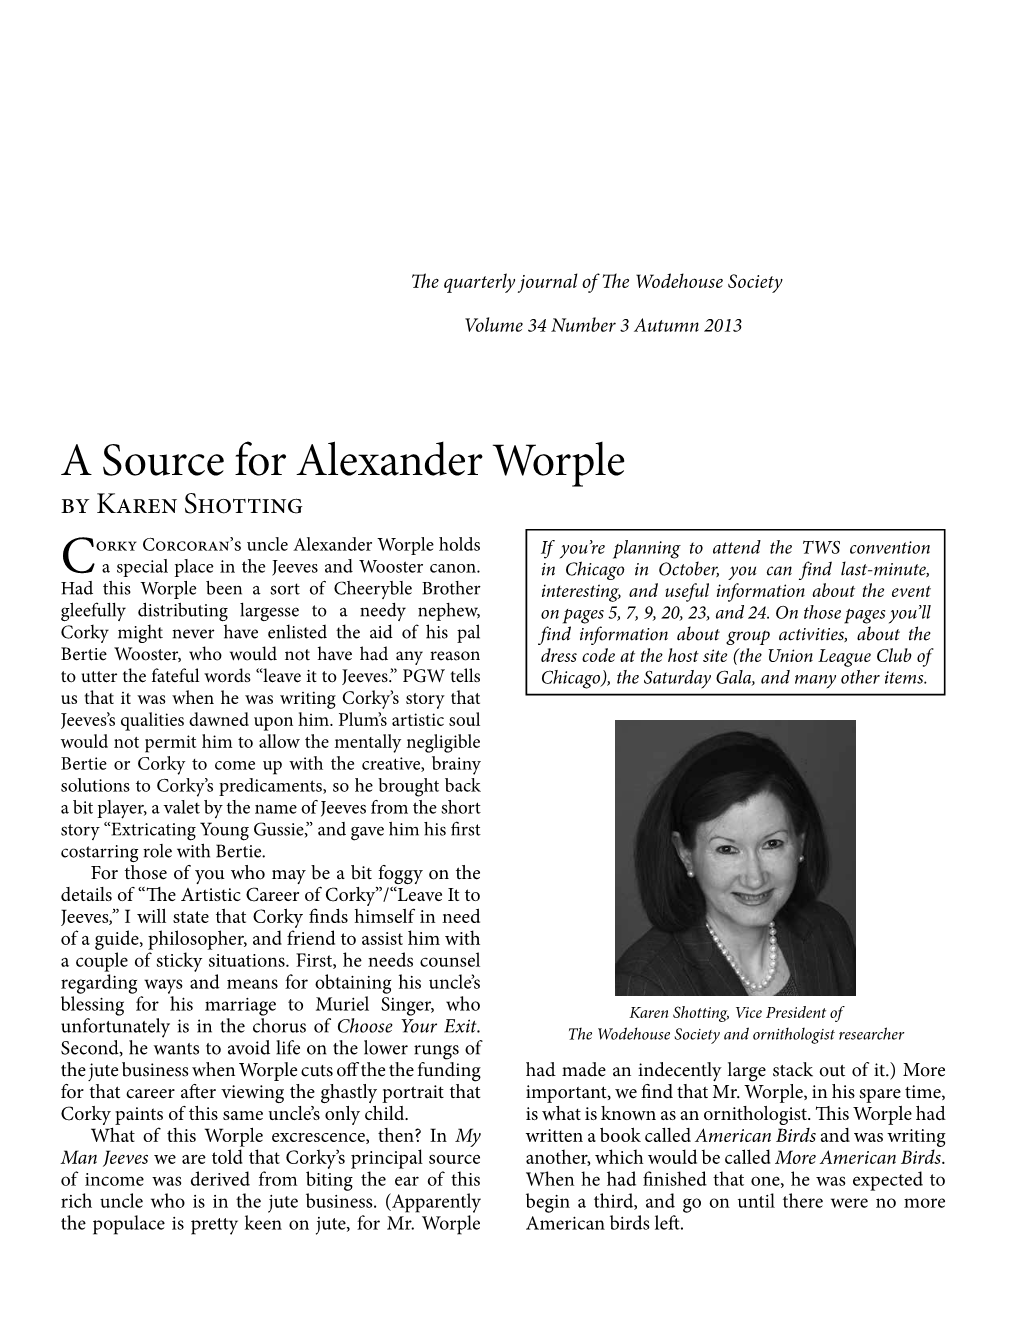 A Source for Alexander Worple